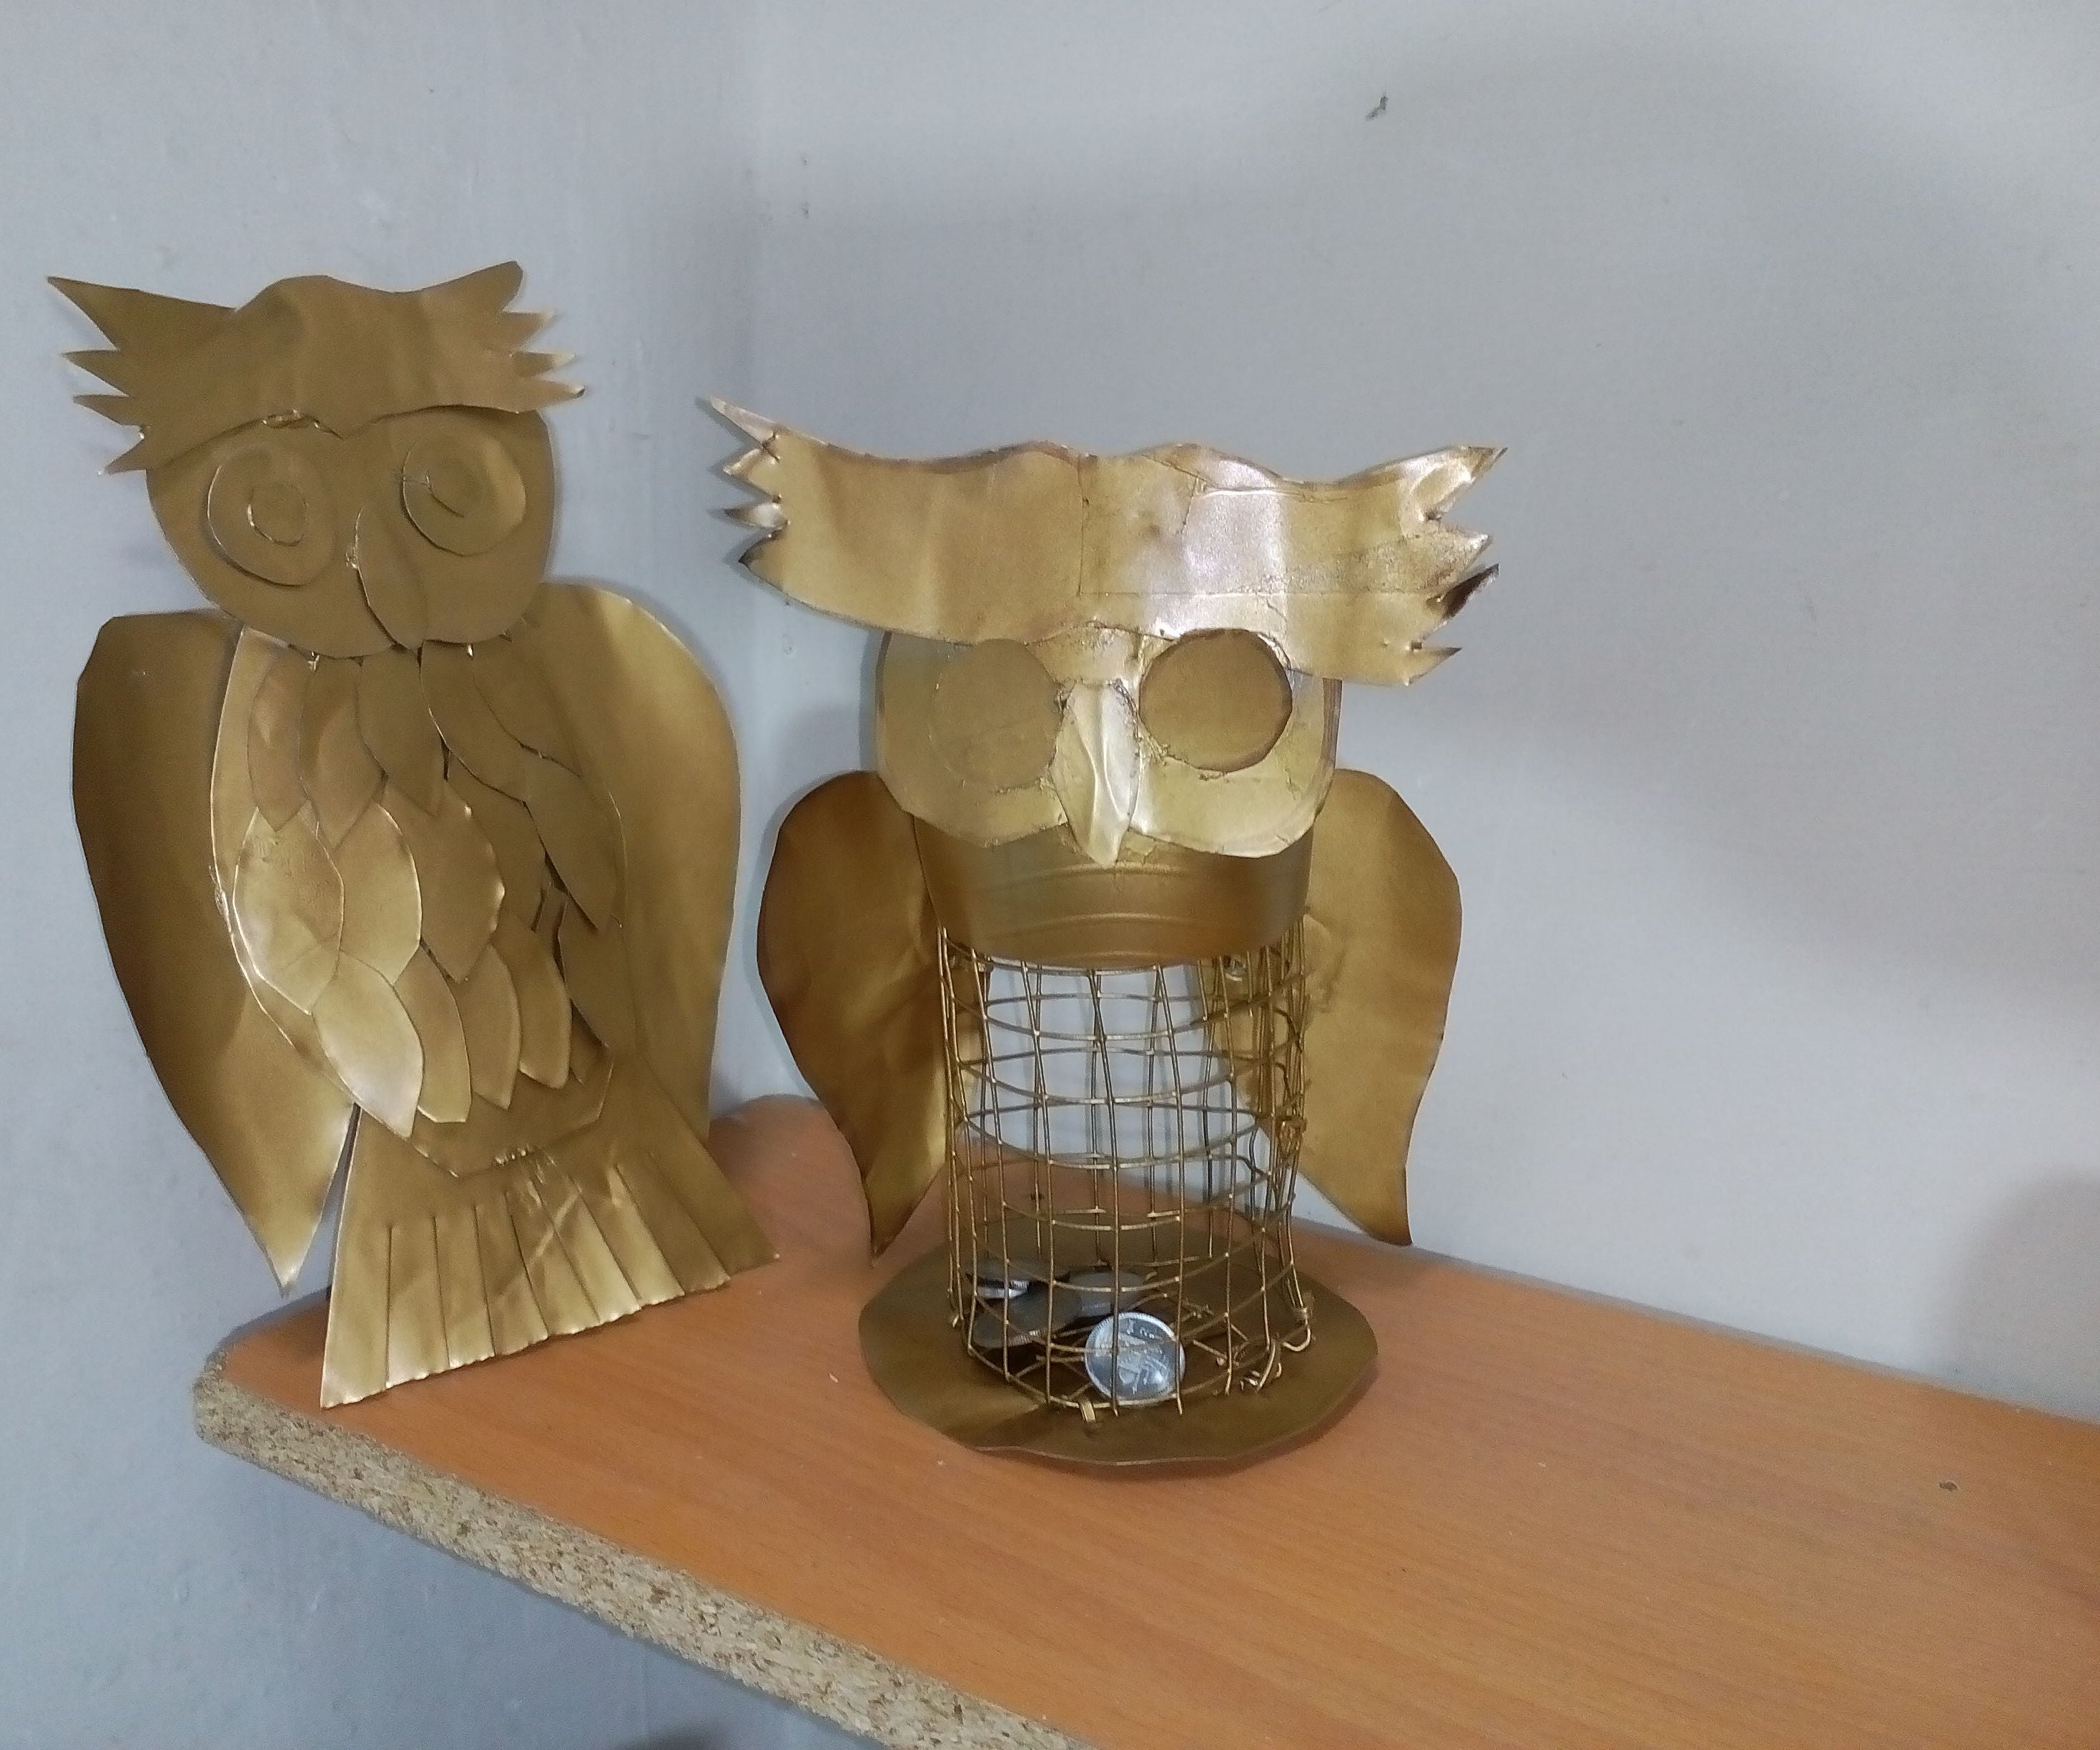 How to Make Owl Coin Bank